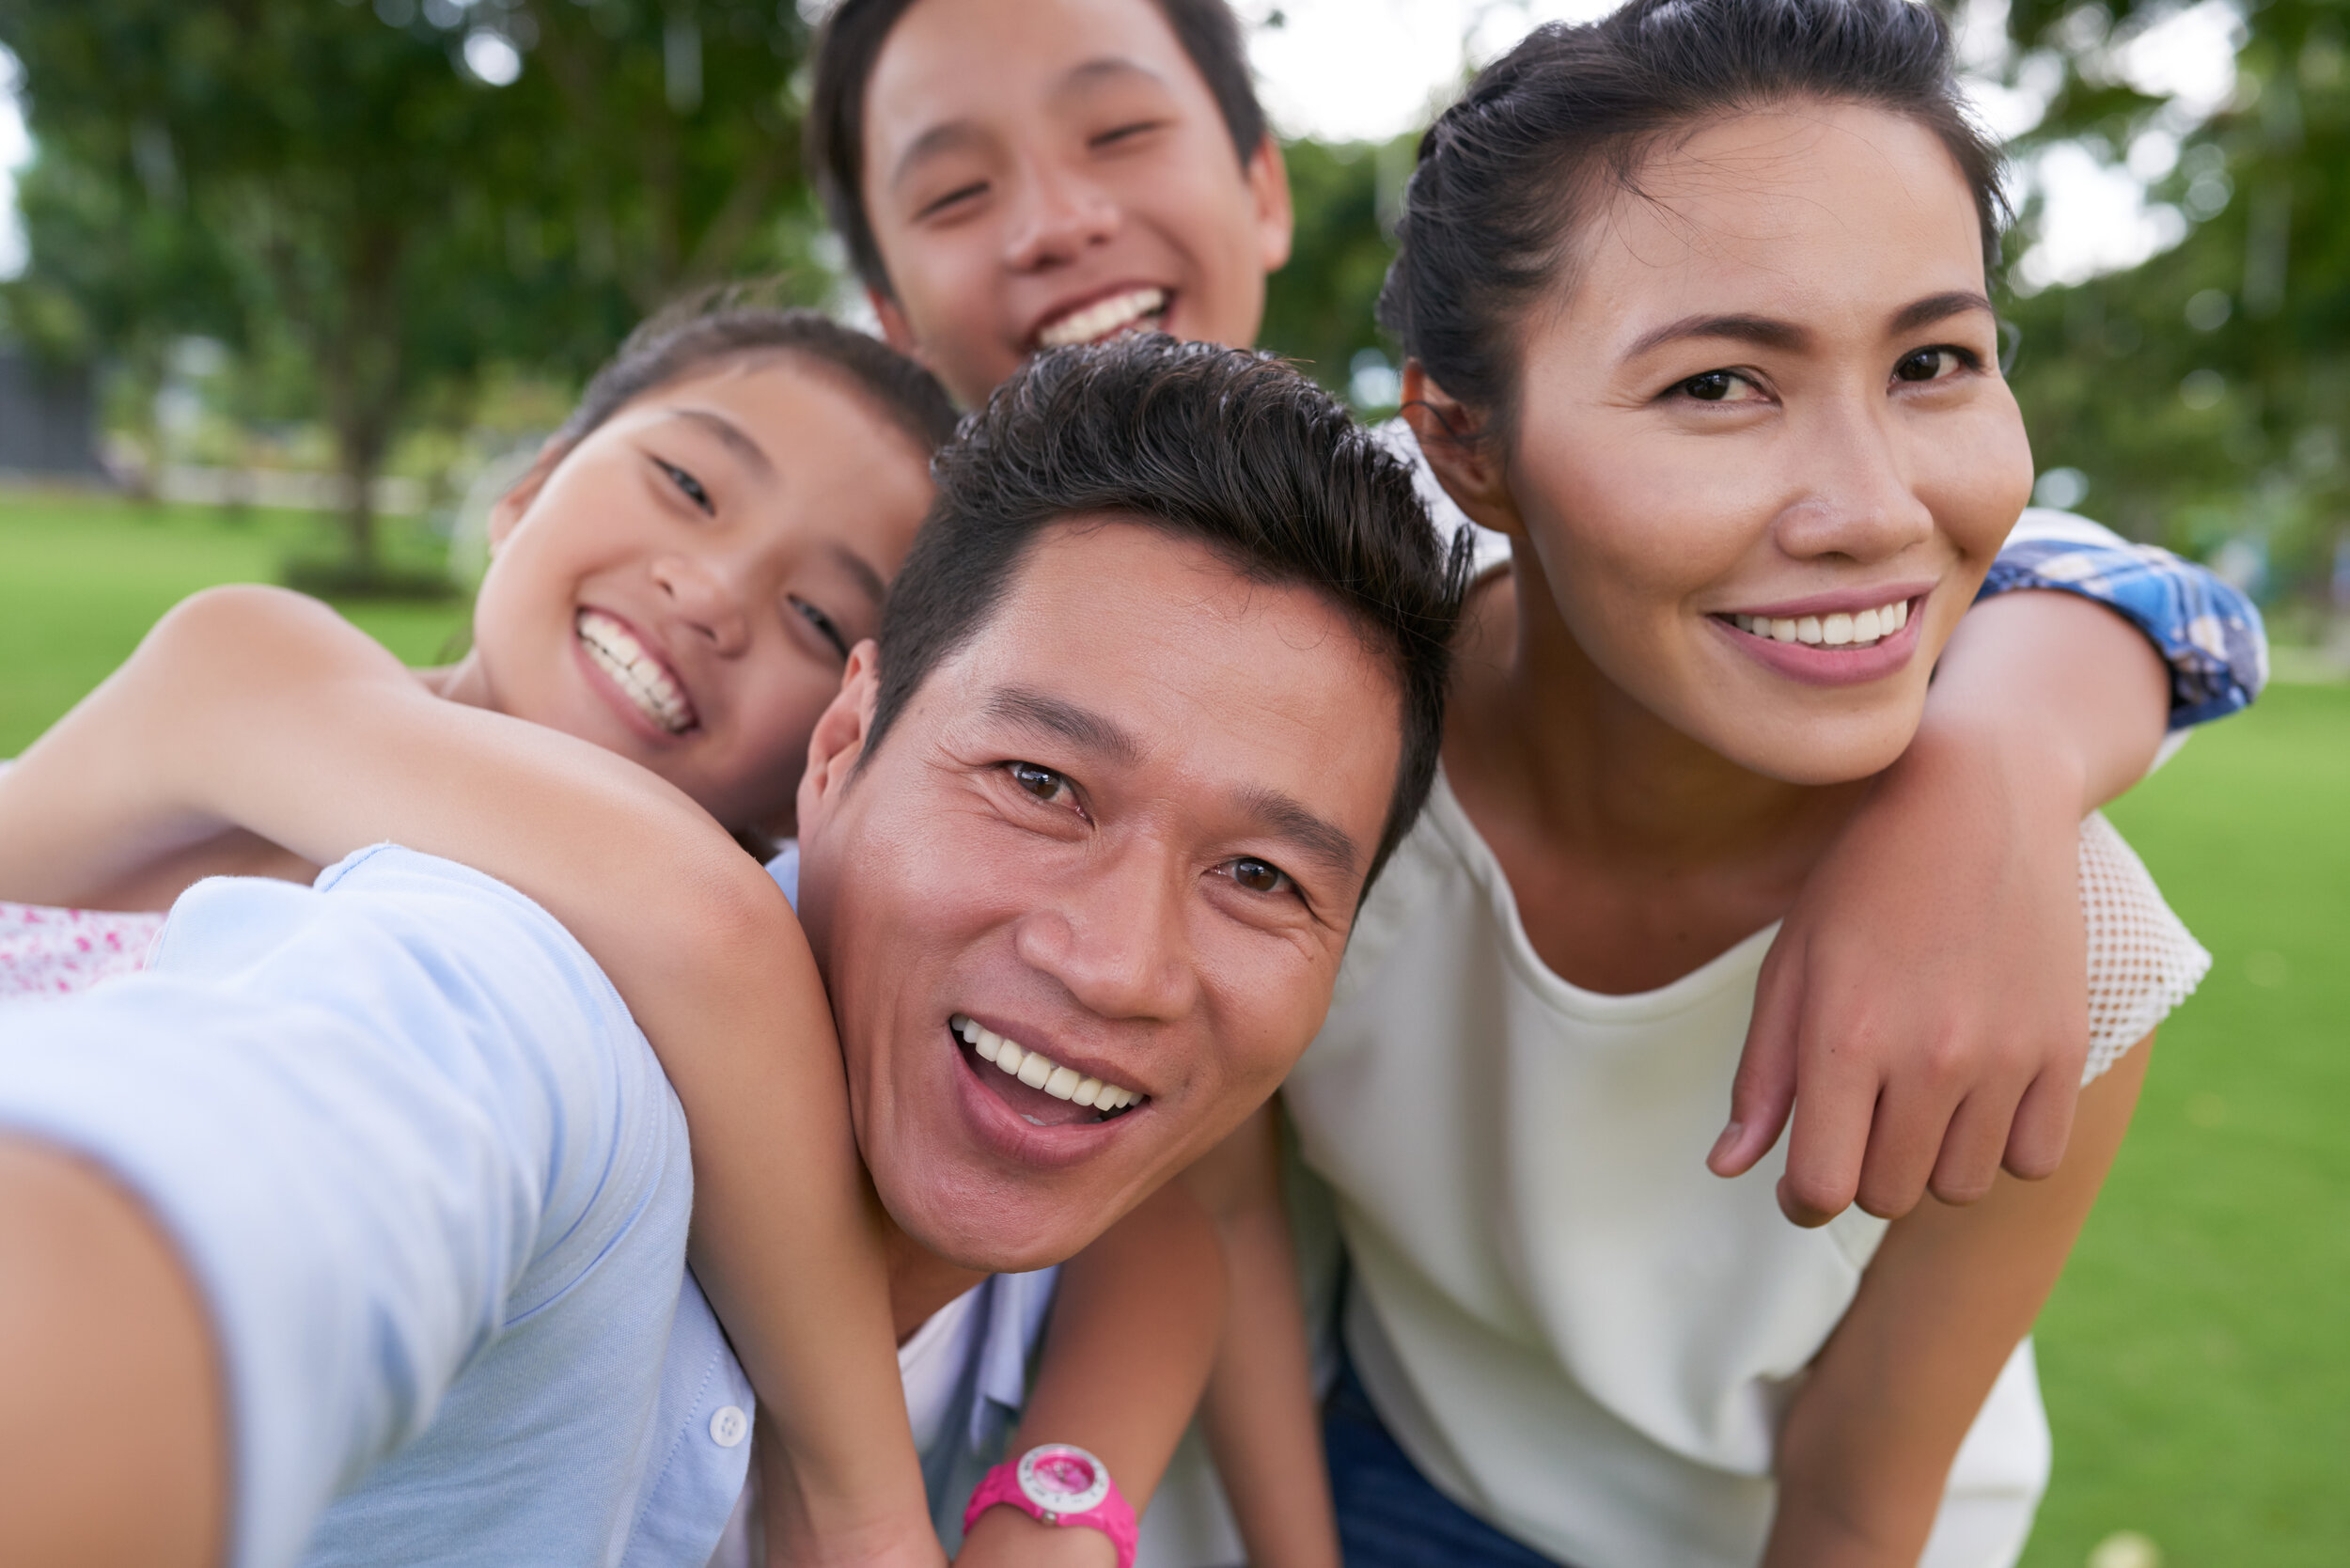   PERSONALIZED   Advanced dentistry in a relaxed and friendly environment for the whole family 